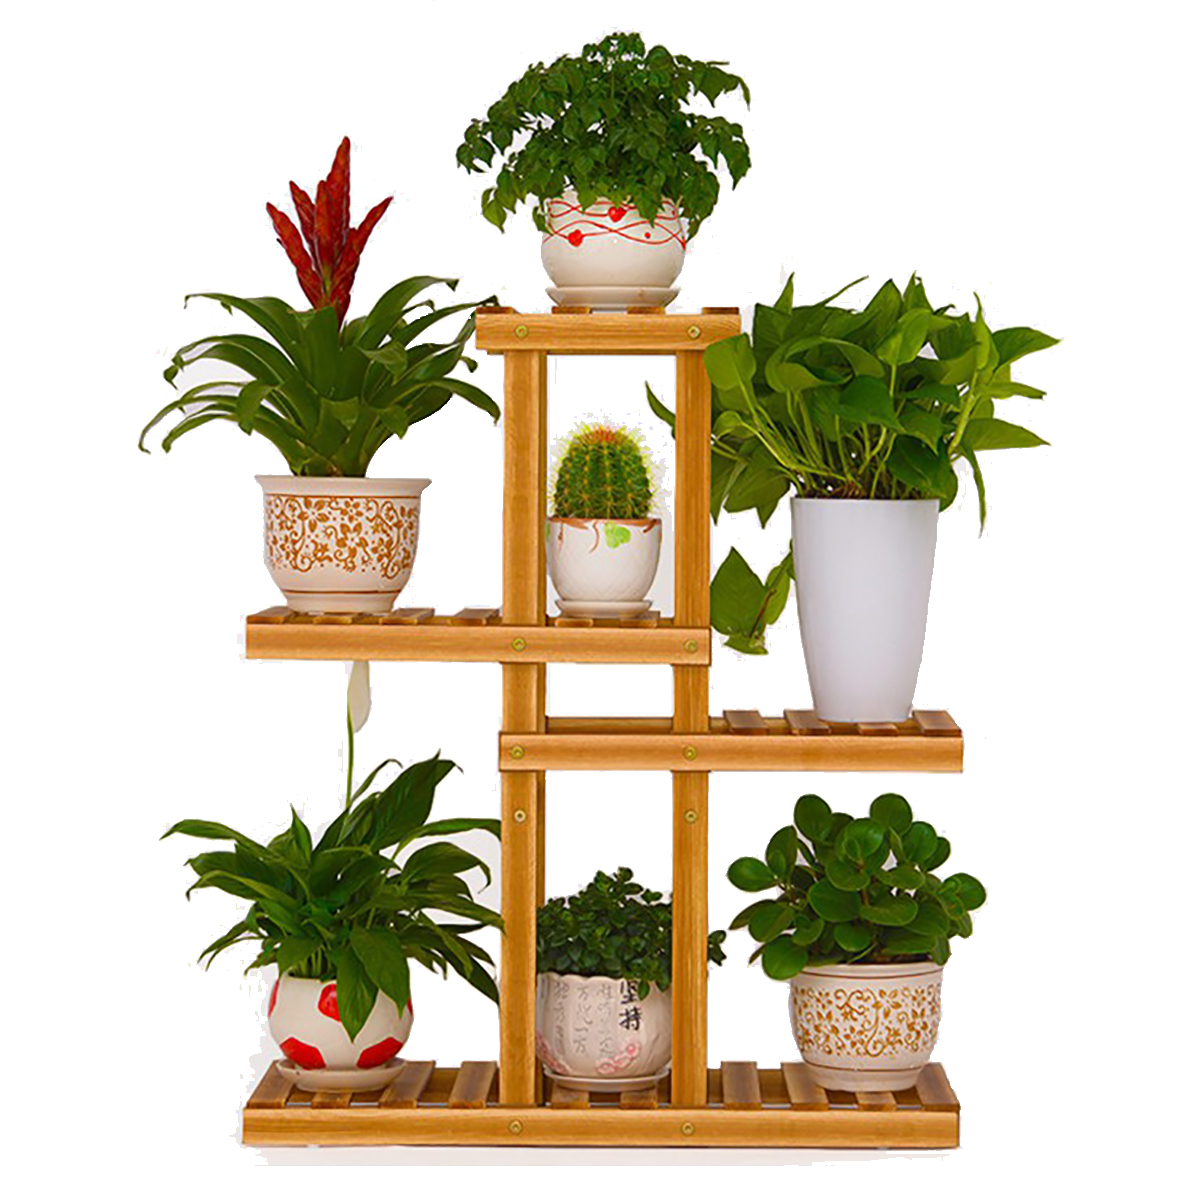 4-Layers-Wooden-Flower-Stand-Pot-Plant-Display-Shelves-Storage-Garden-Home-Decoration-1724682-3